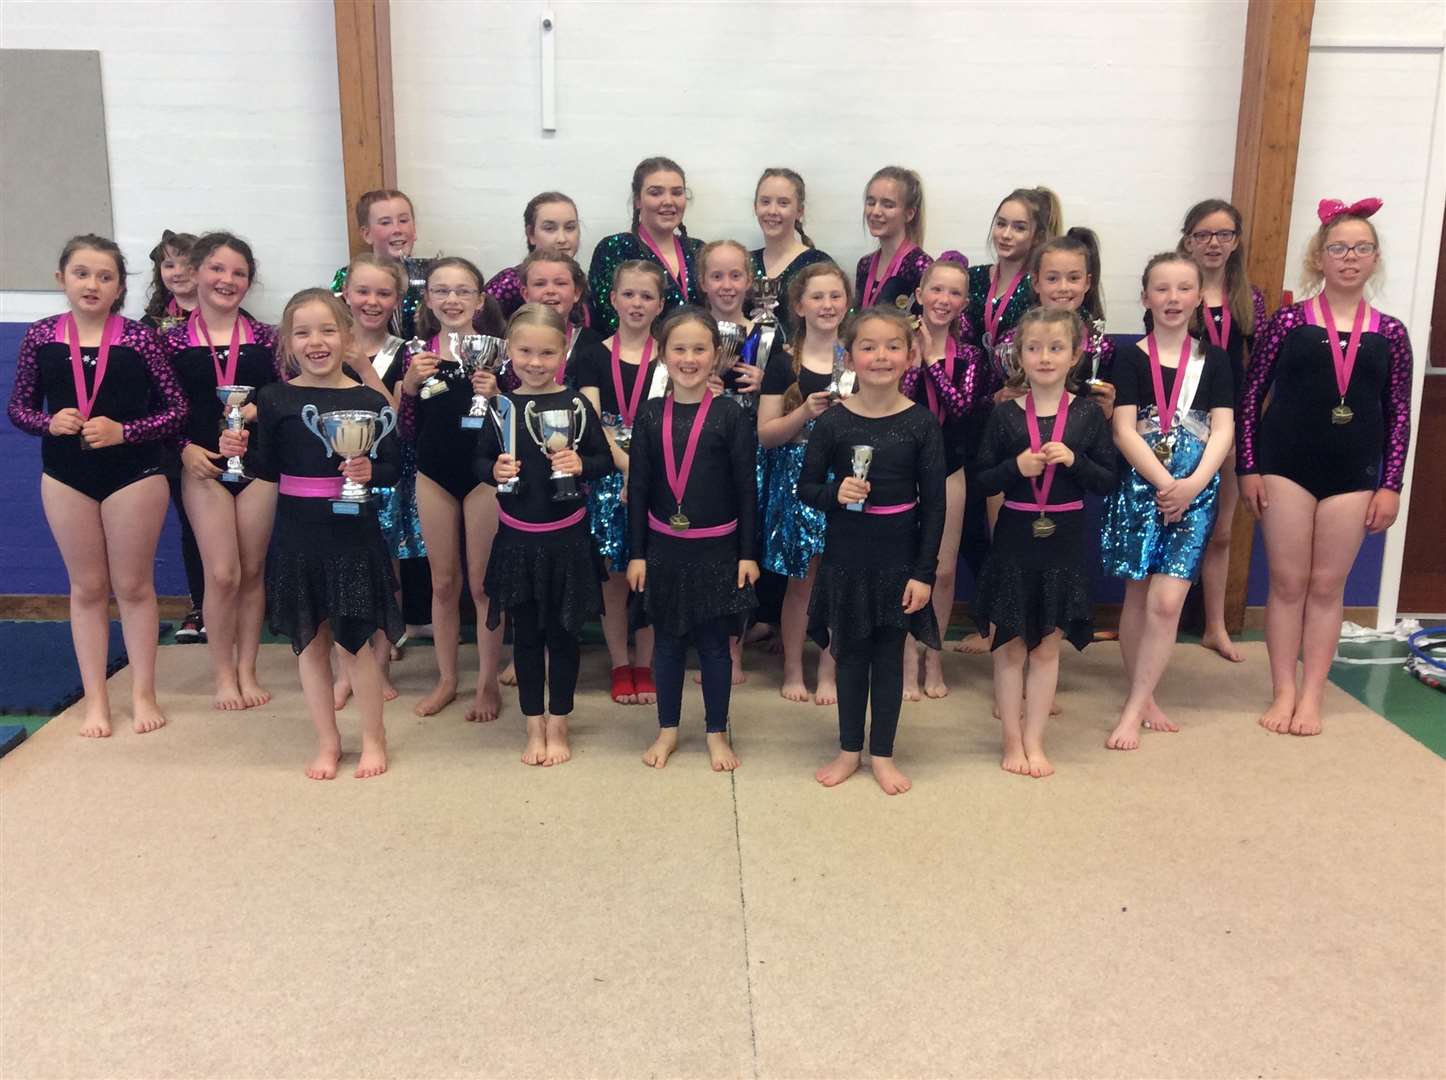 Gymnasts with their trophies and medals.